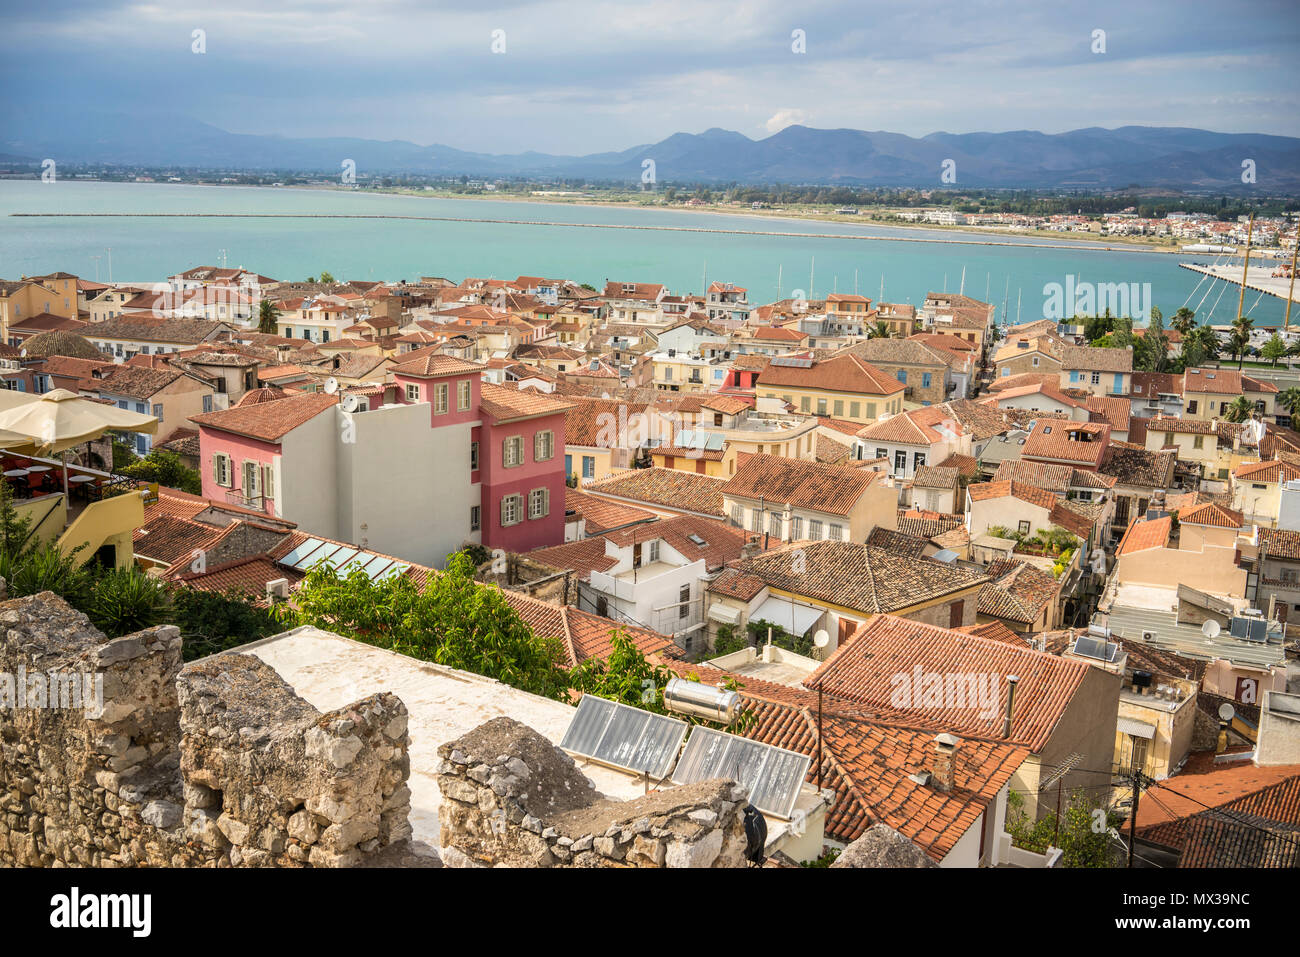 A view of the city of Nafplion, Greece, on June 9, 2016. Stock Photo